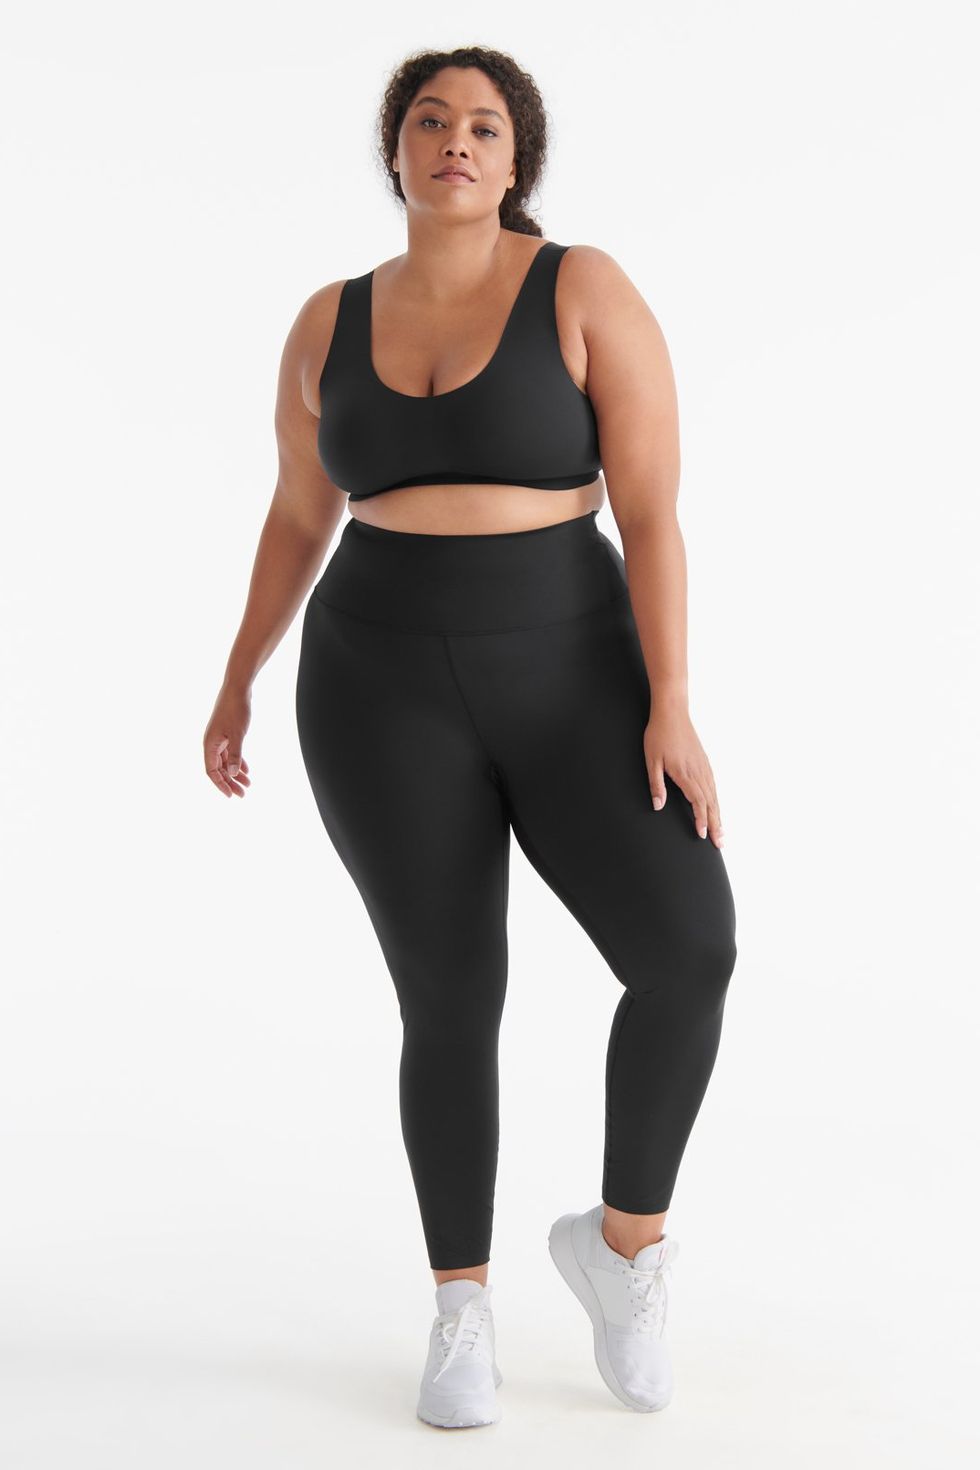 Knix and Ashley Graham Launch New Activewear Collection - FASHION